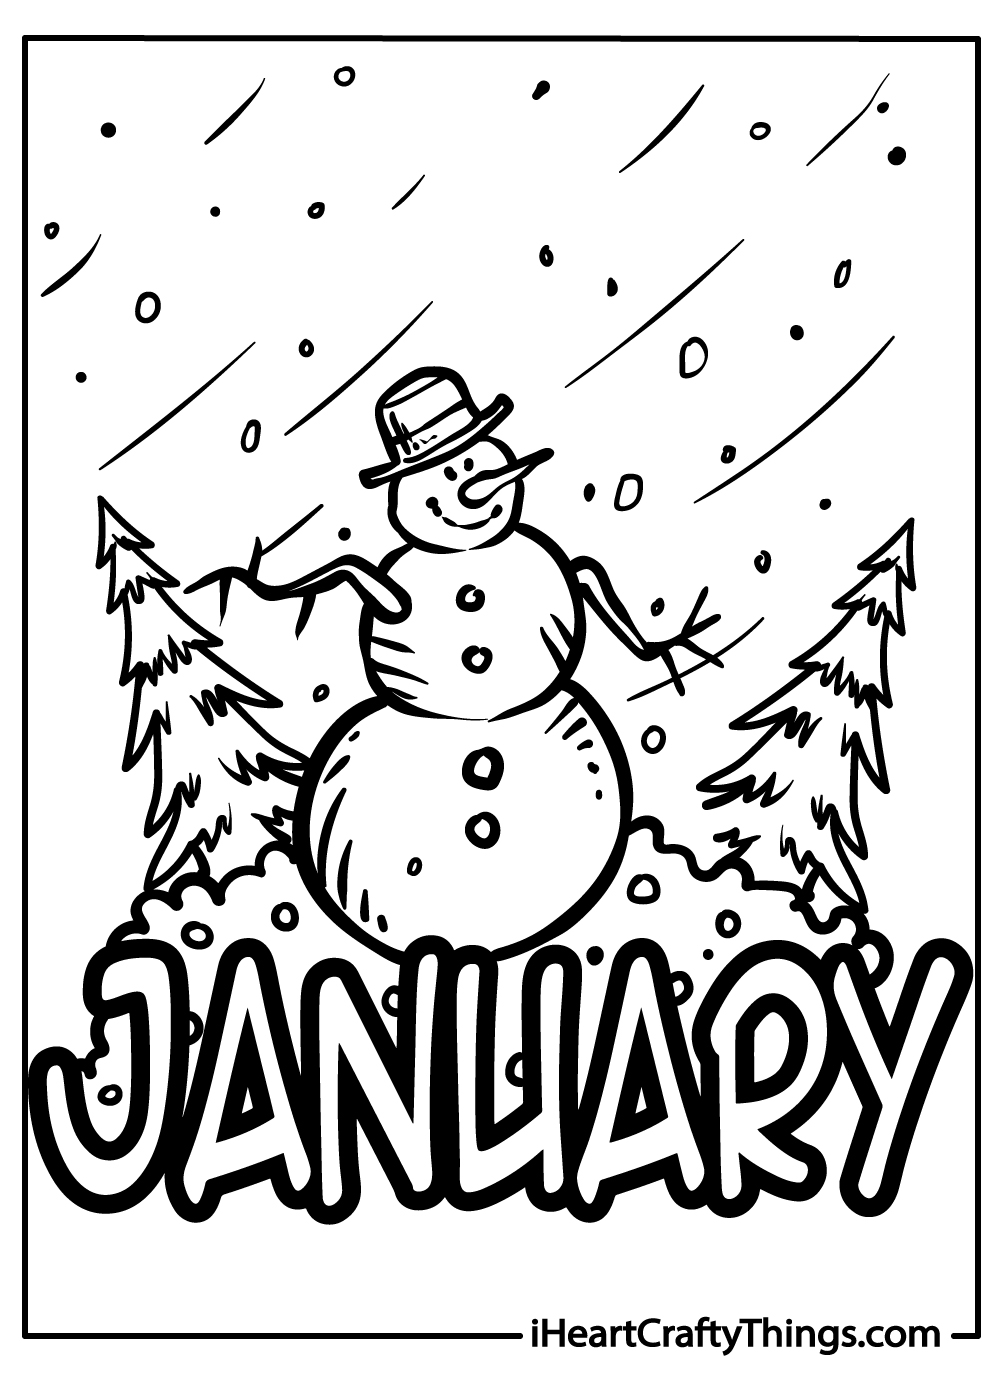 January coloring pages for kids